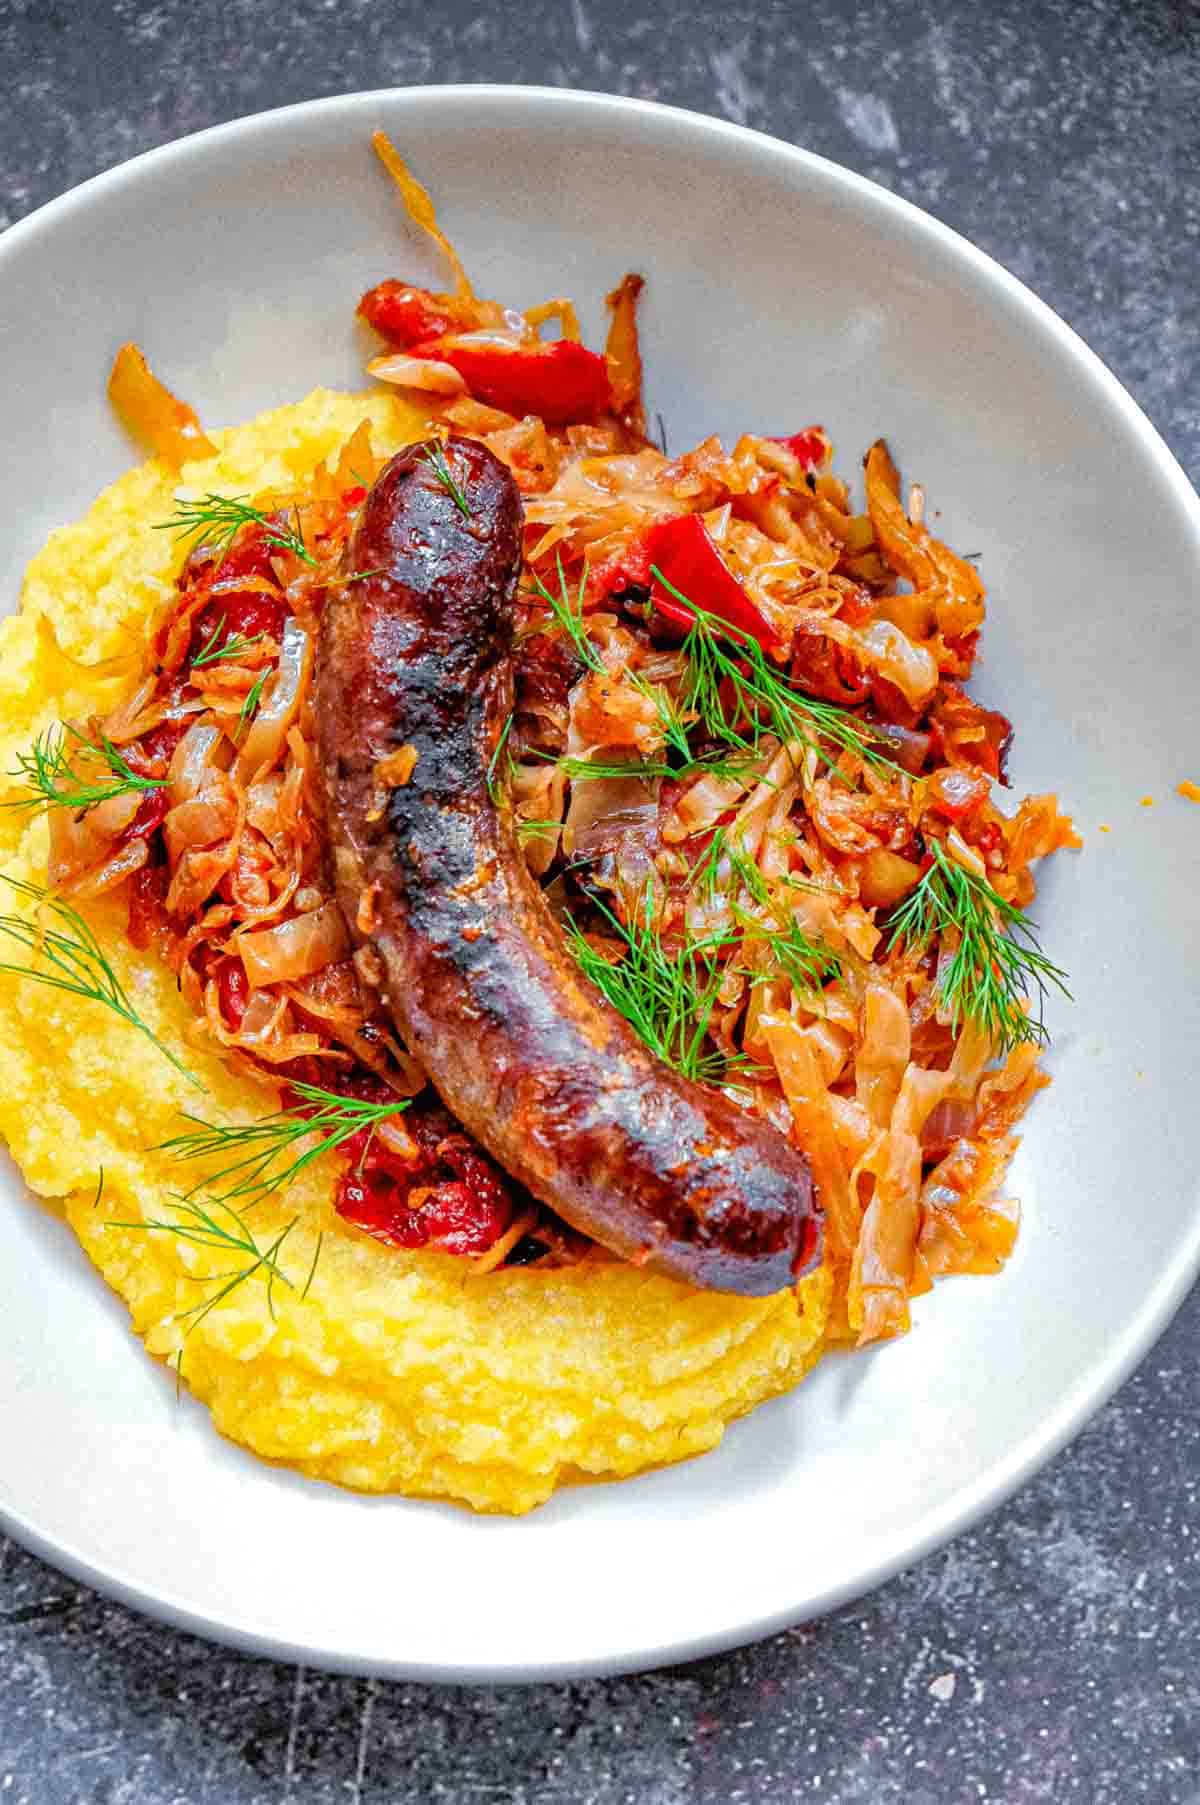 A bowl of slow roasted Romanian sauerkraut with smoked pork sausage over creamy yellow polenta and with a few sprigs of dill as garnish.